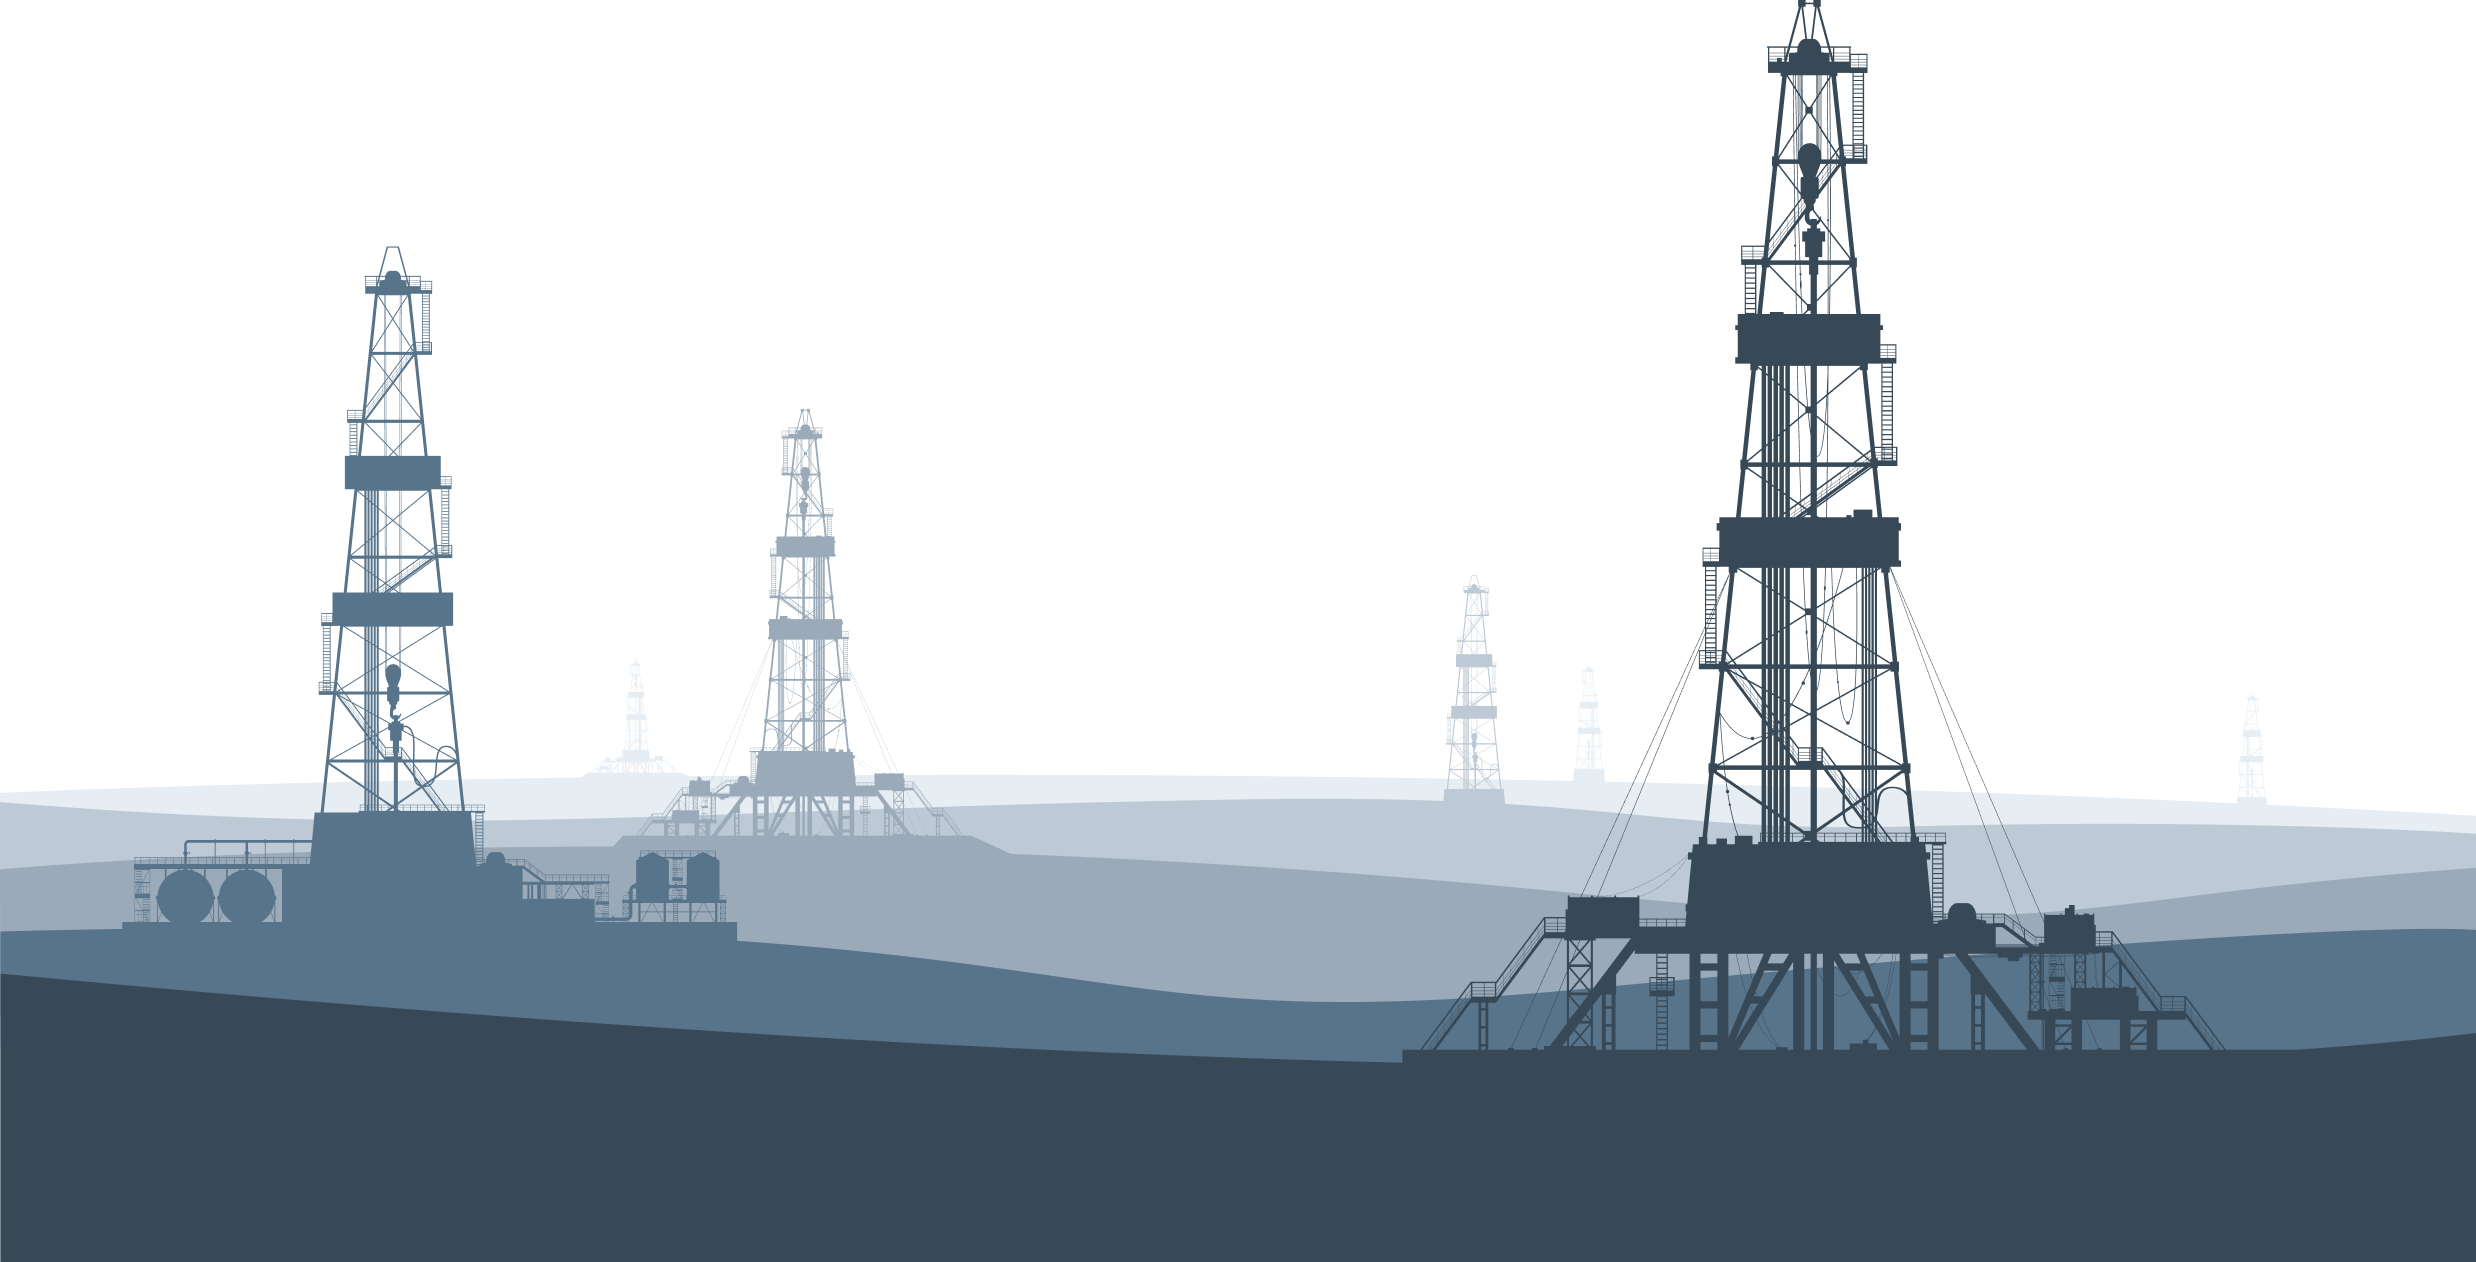 Illustrated oil fields